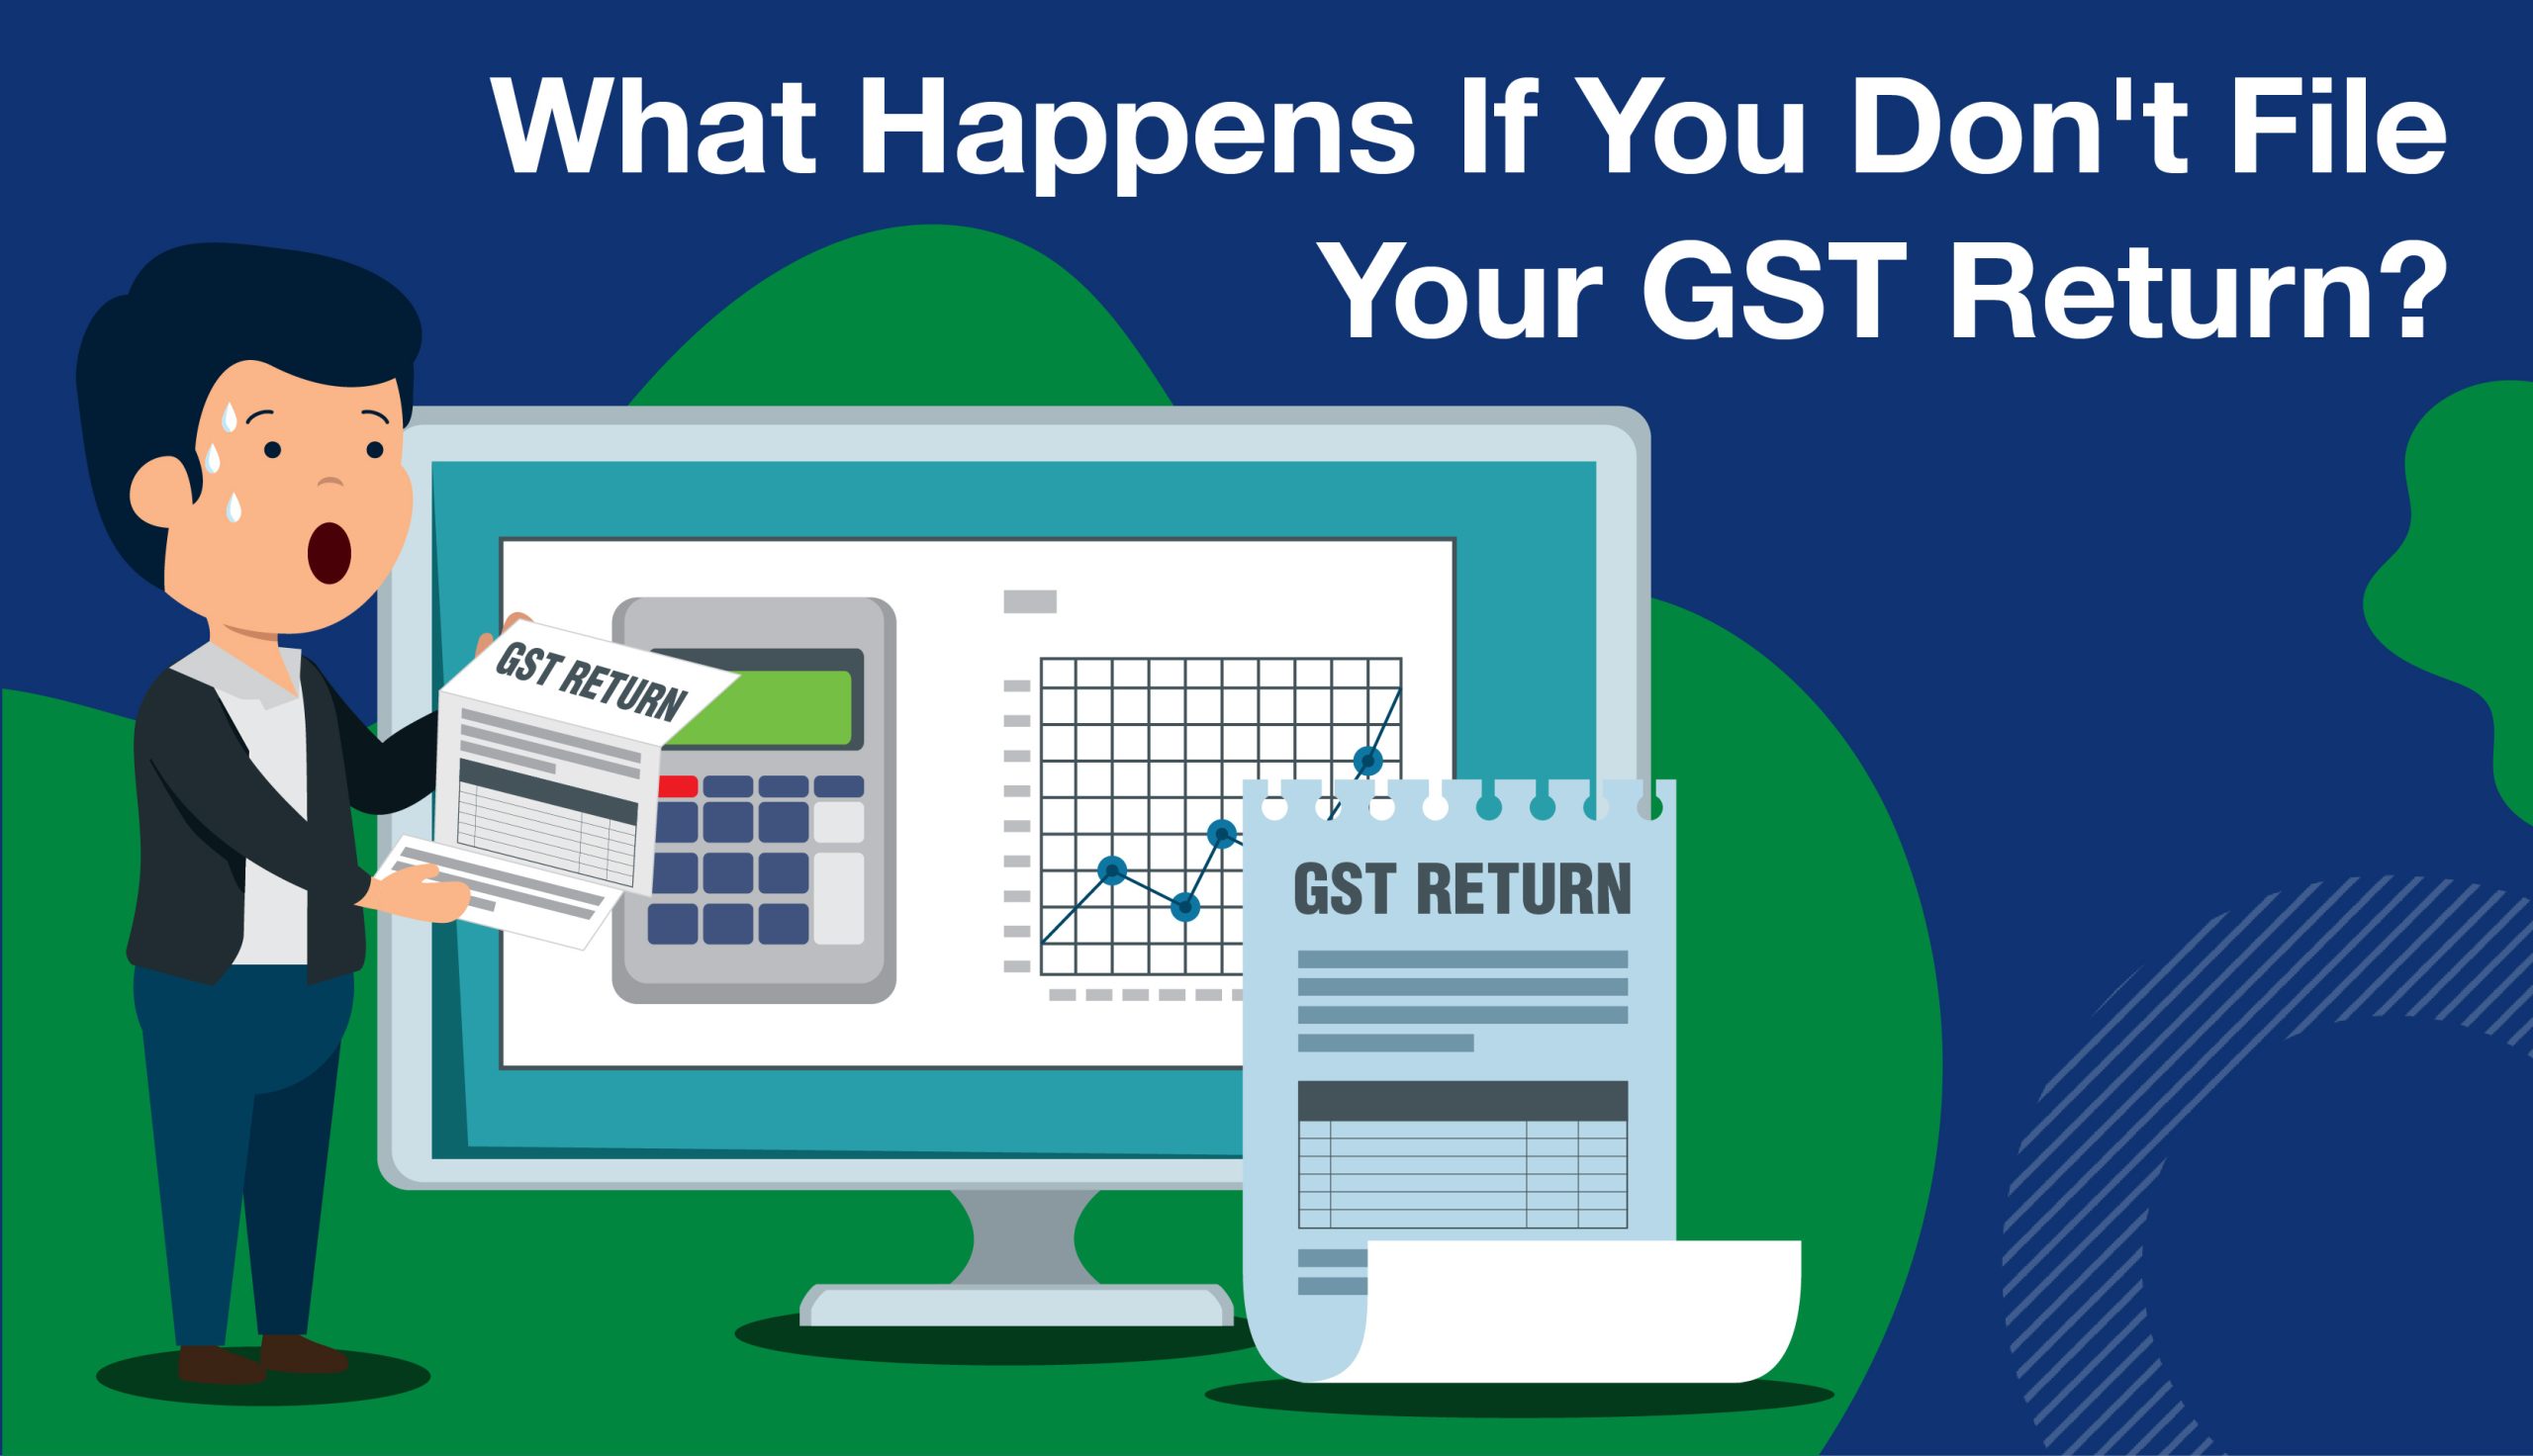 What Happens If You Don’t File Your GST Return?